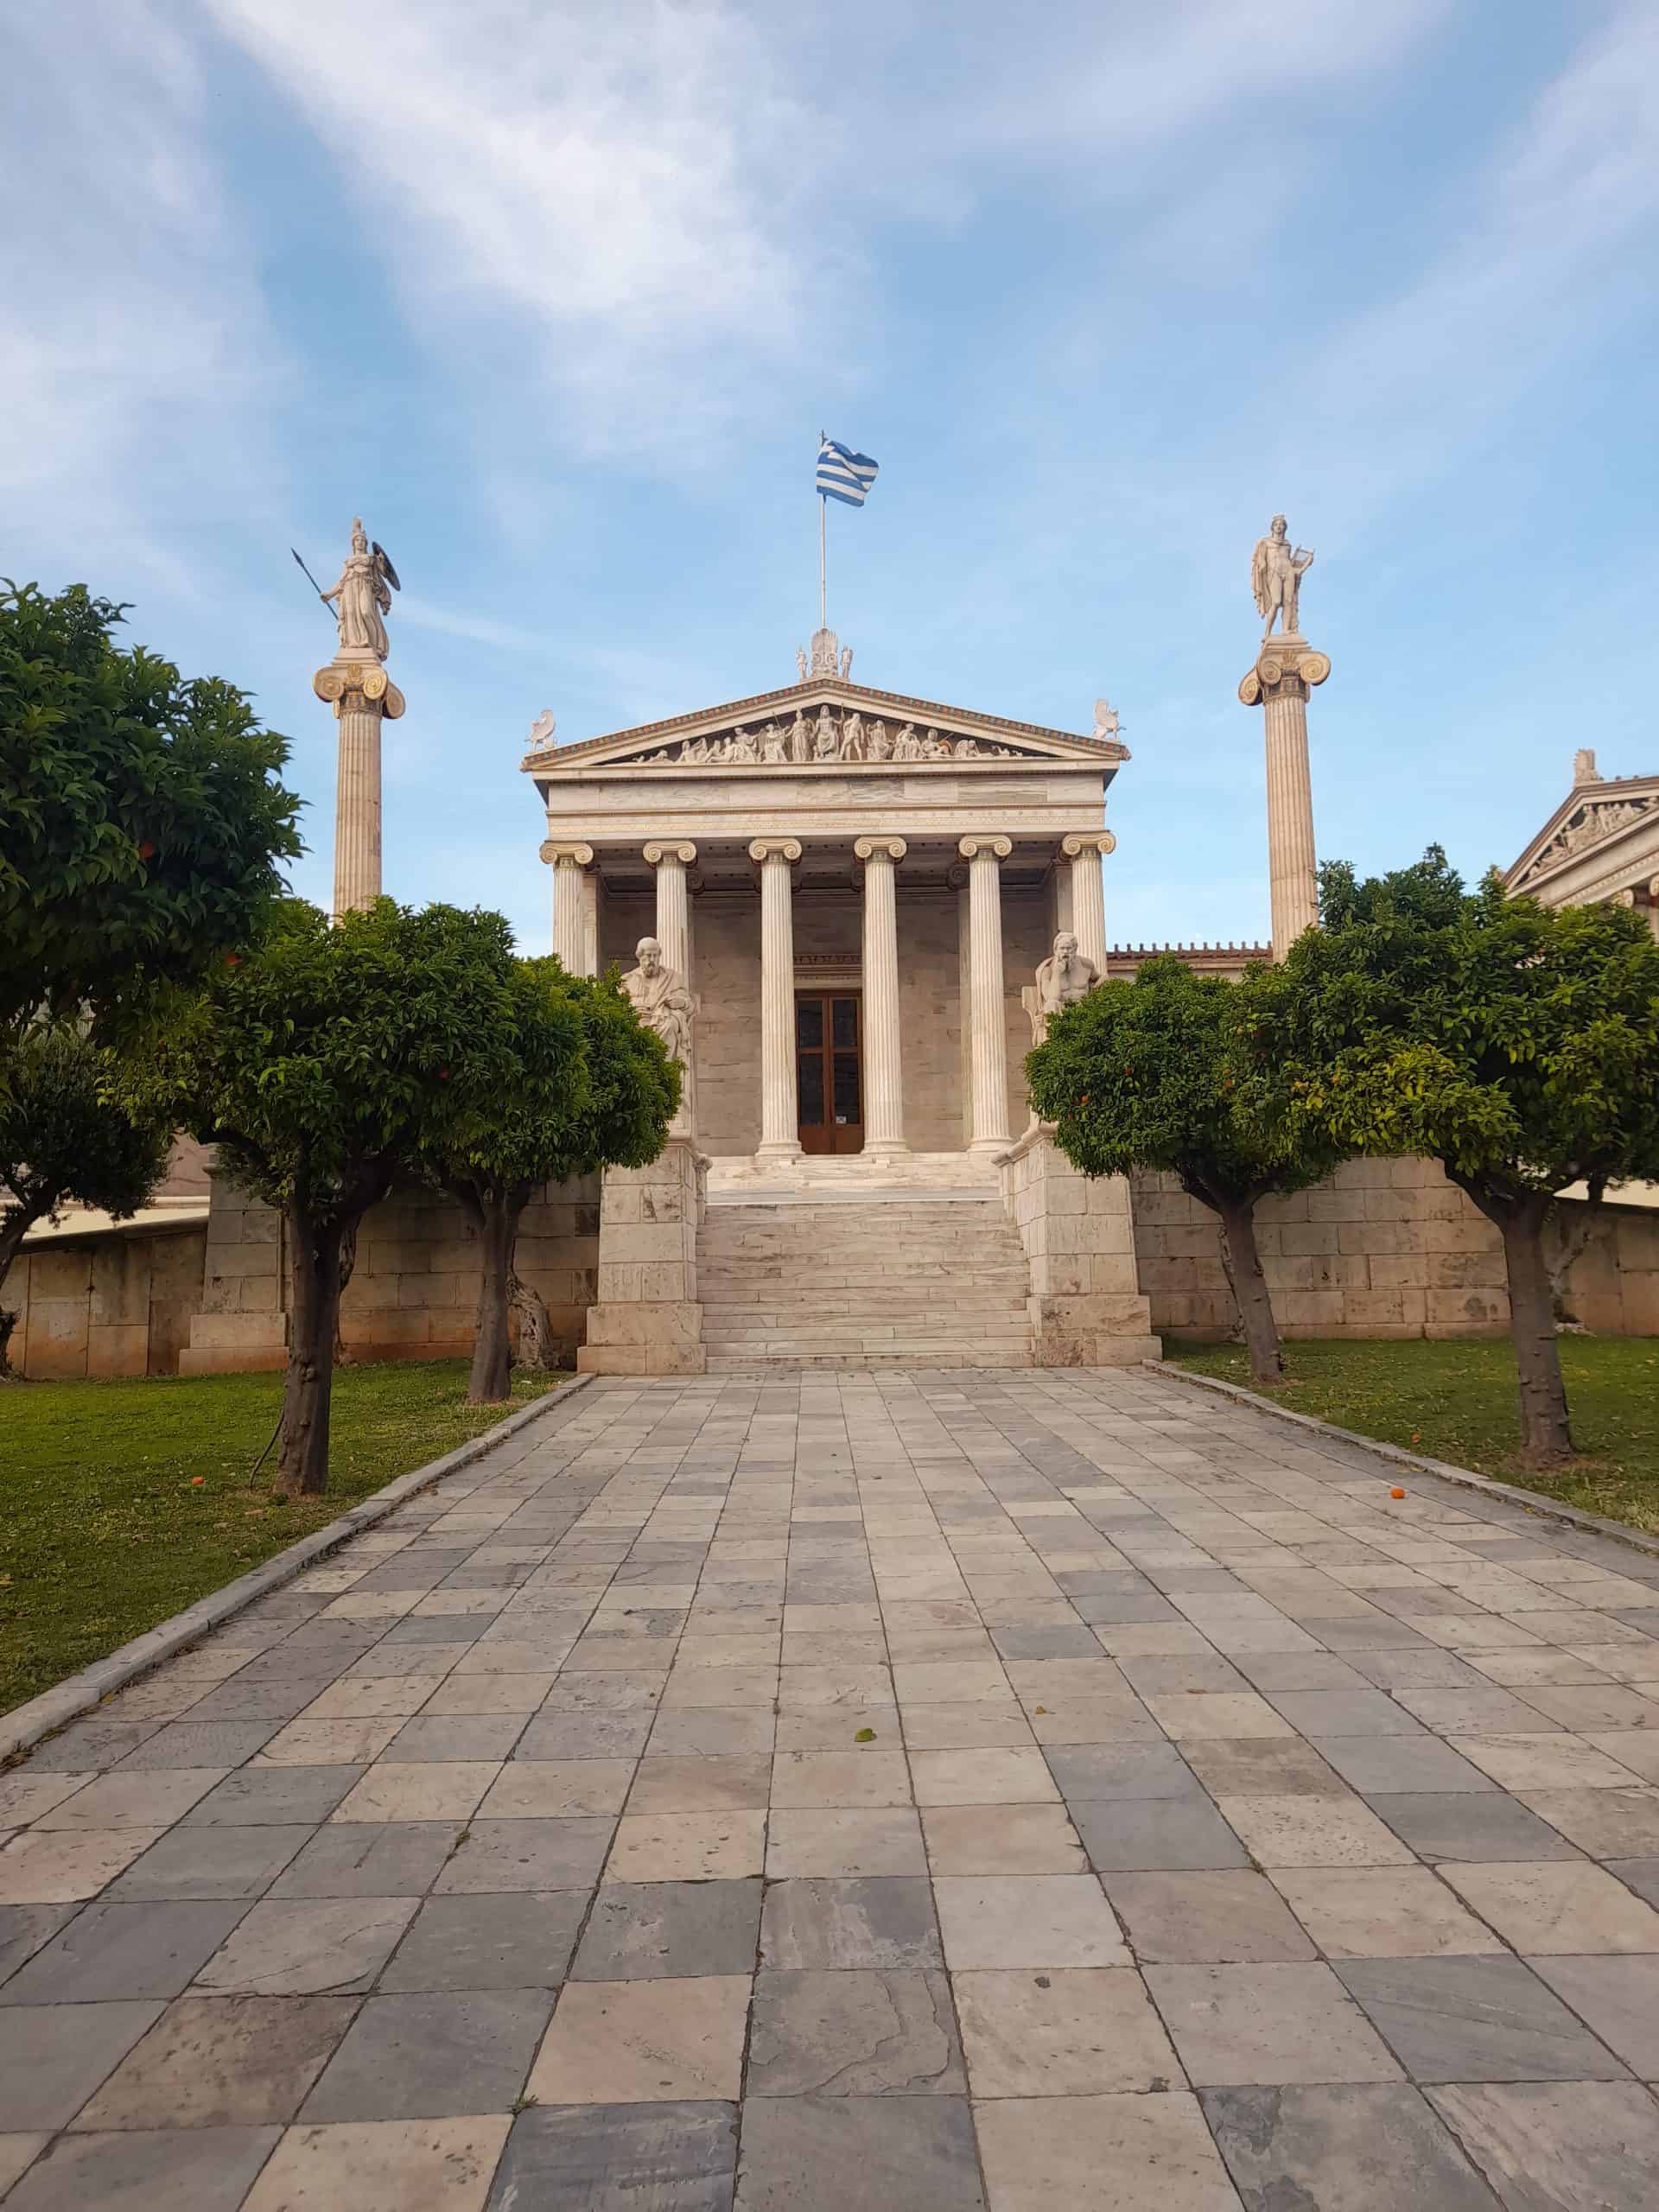 Landmarks in Athens: Academy of Athens